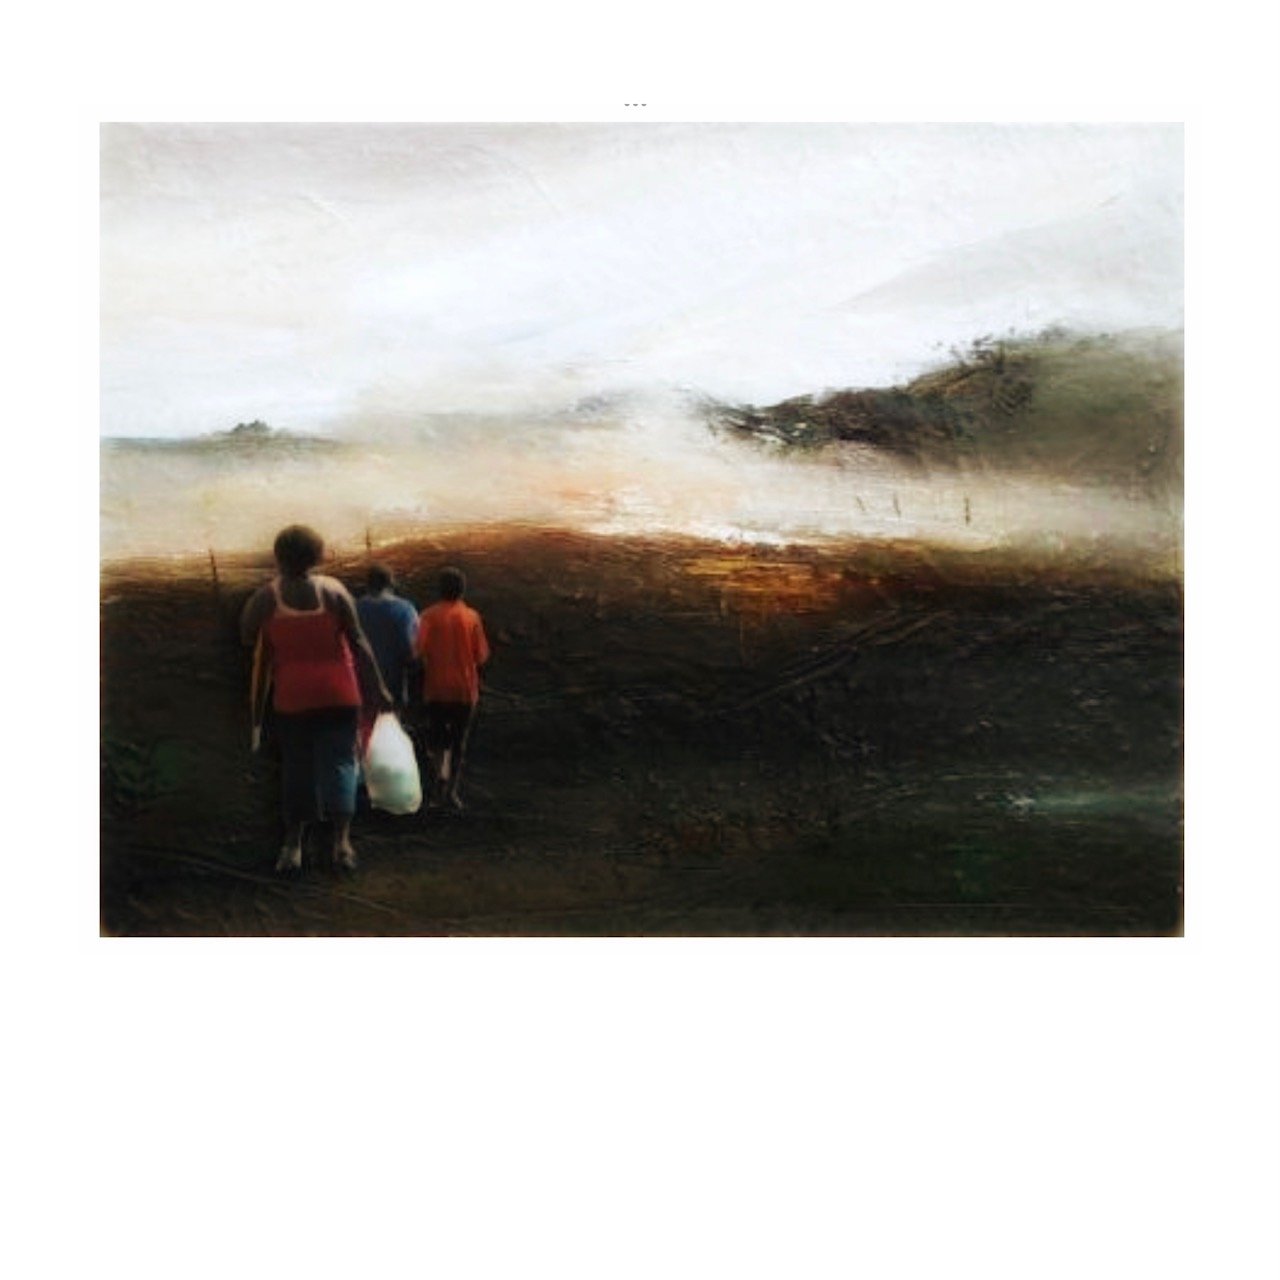 African Dream Scape - Oil on canvas with photo image - 15cm x 20cm - wb.JPG